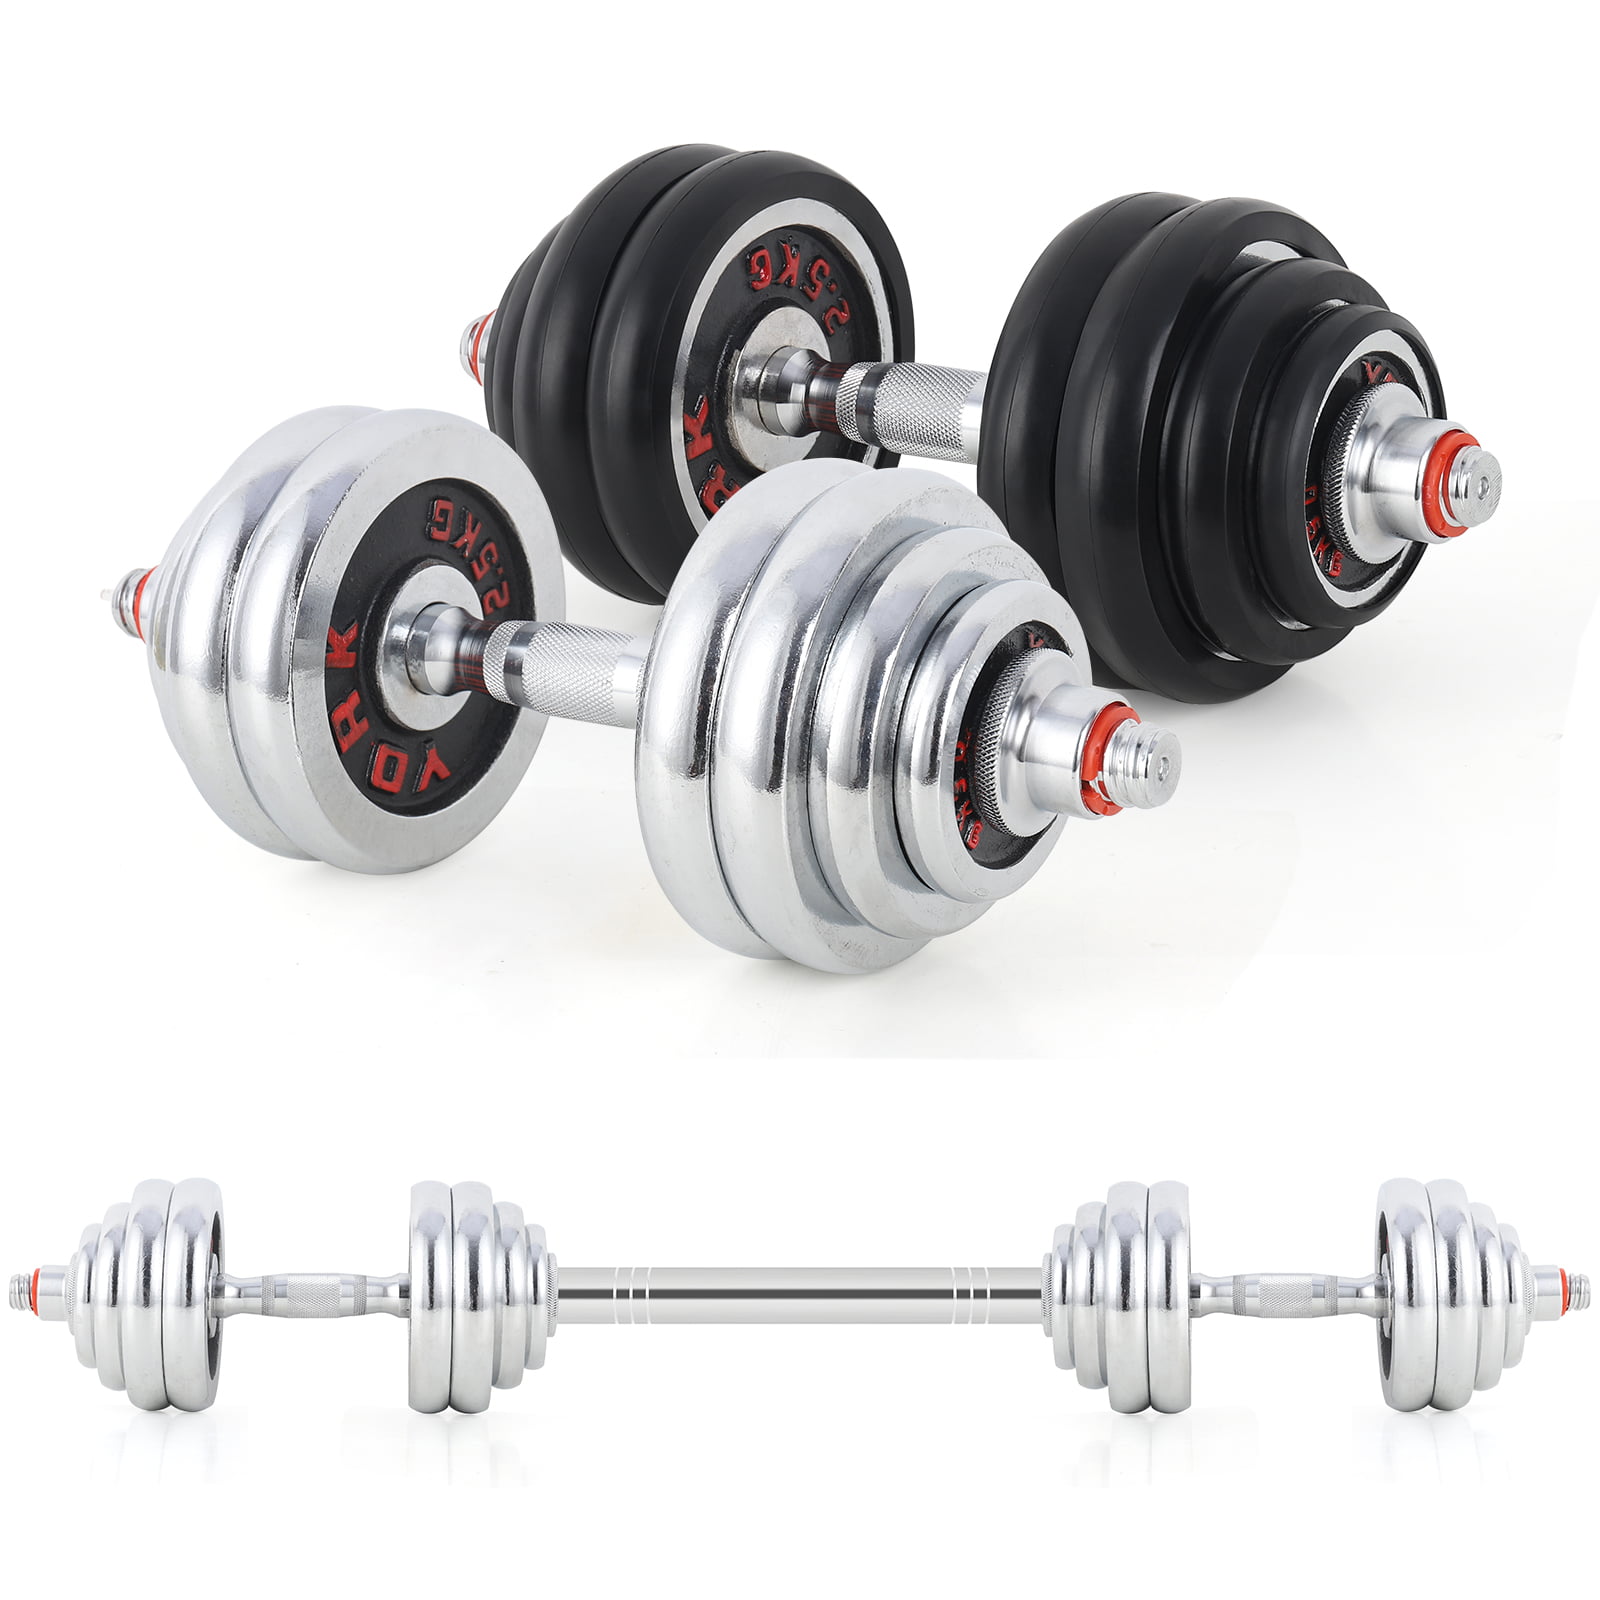 Barbells Workout equipment Fitness Exercise Exercise equipments for men  Weight lifting Gym accessories Work out equipment